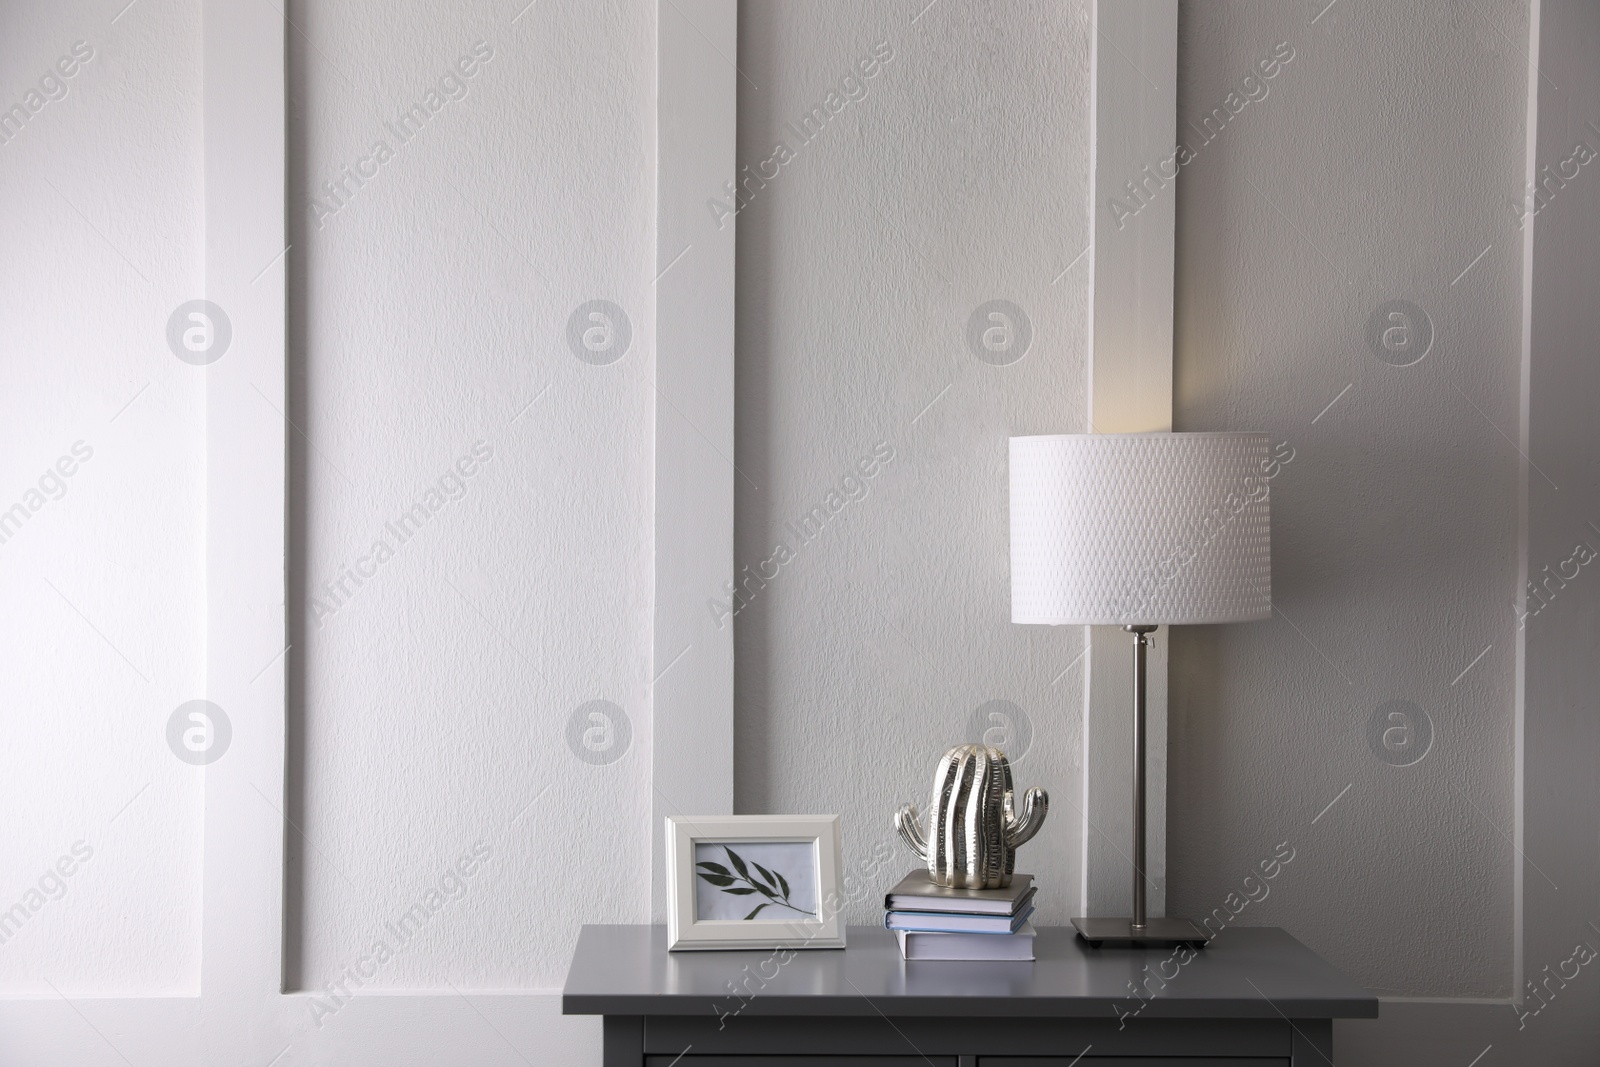 Photo of Wooden table with books, decor and lamp near white wall in room, space for text